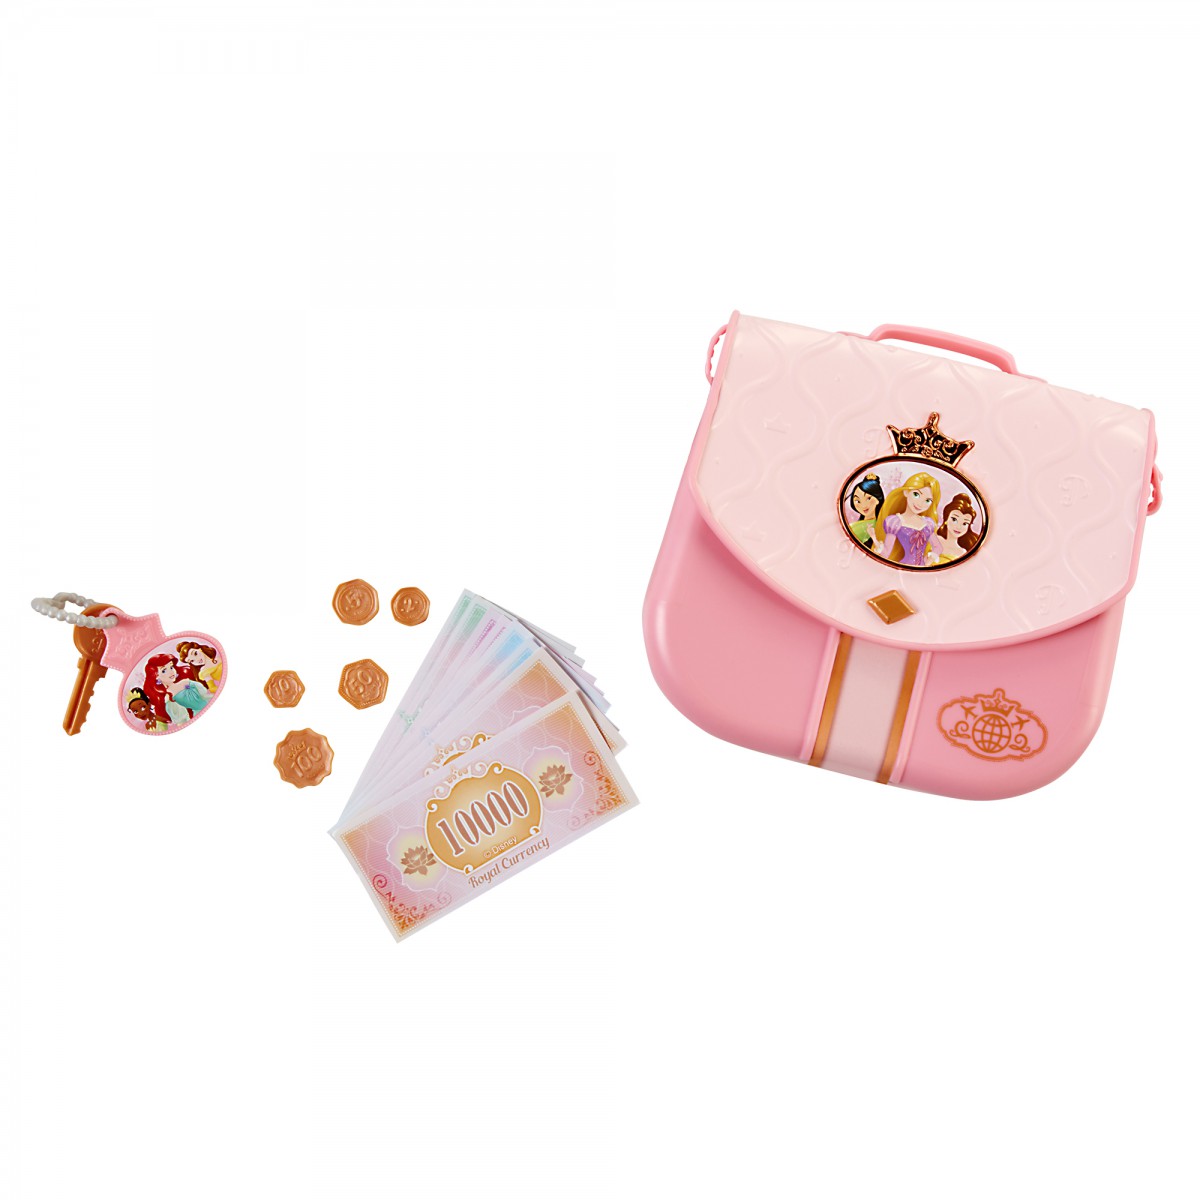 Buy Battat Play Circle Purse Set, 23 x 1.5 x 25 Centimeters Online at Low  Prices in India - Amazon.in